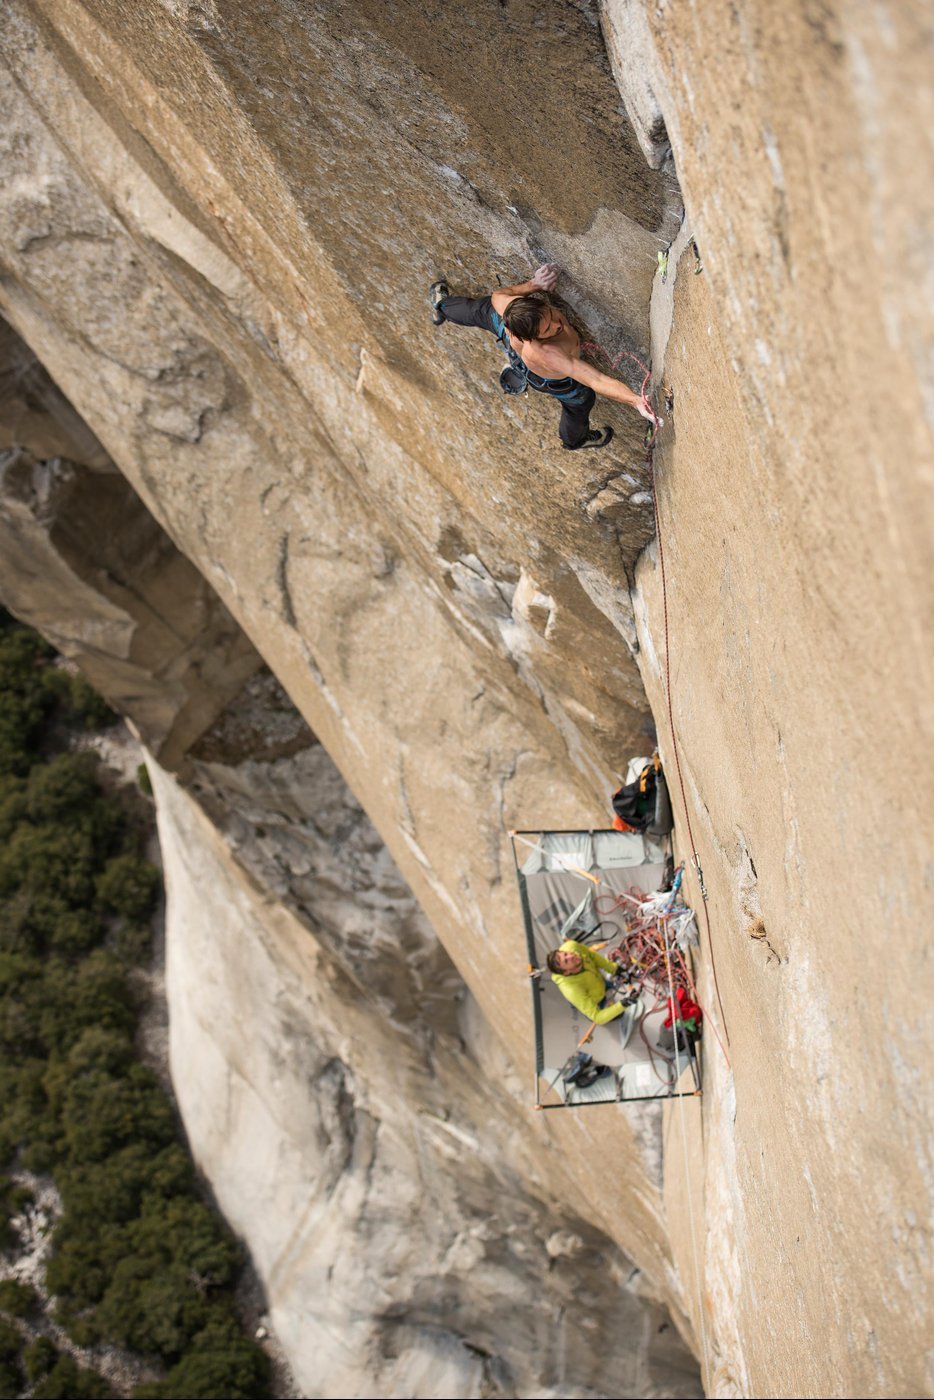 Kevin Jorgeson, Dawn Wall of El Cap. Corey Rich / Red Bull Content Pool